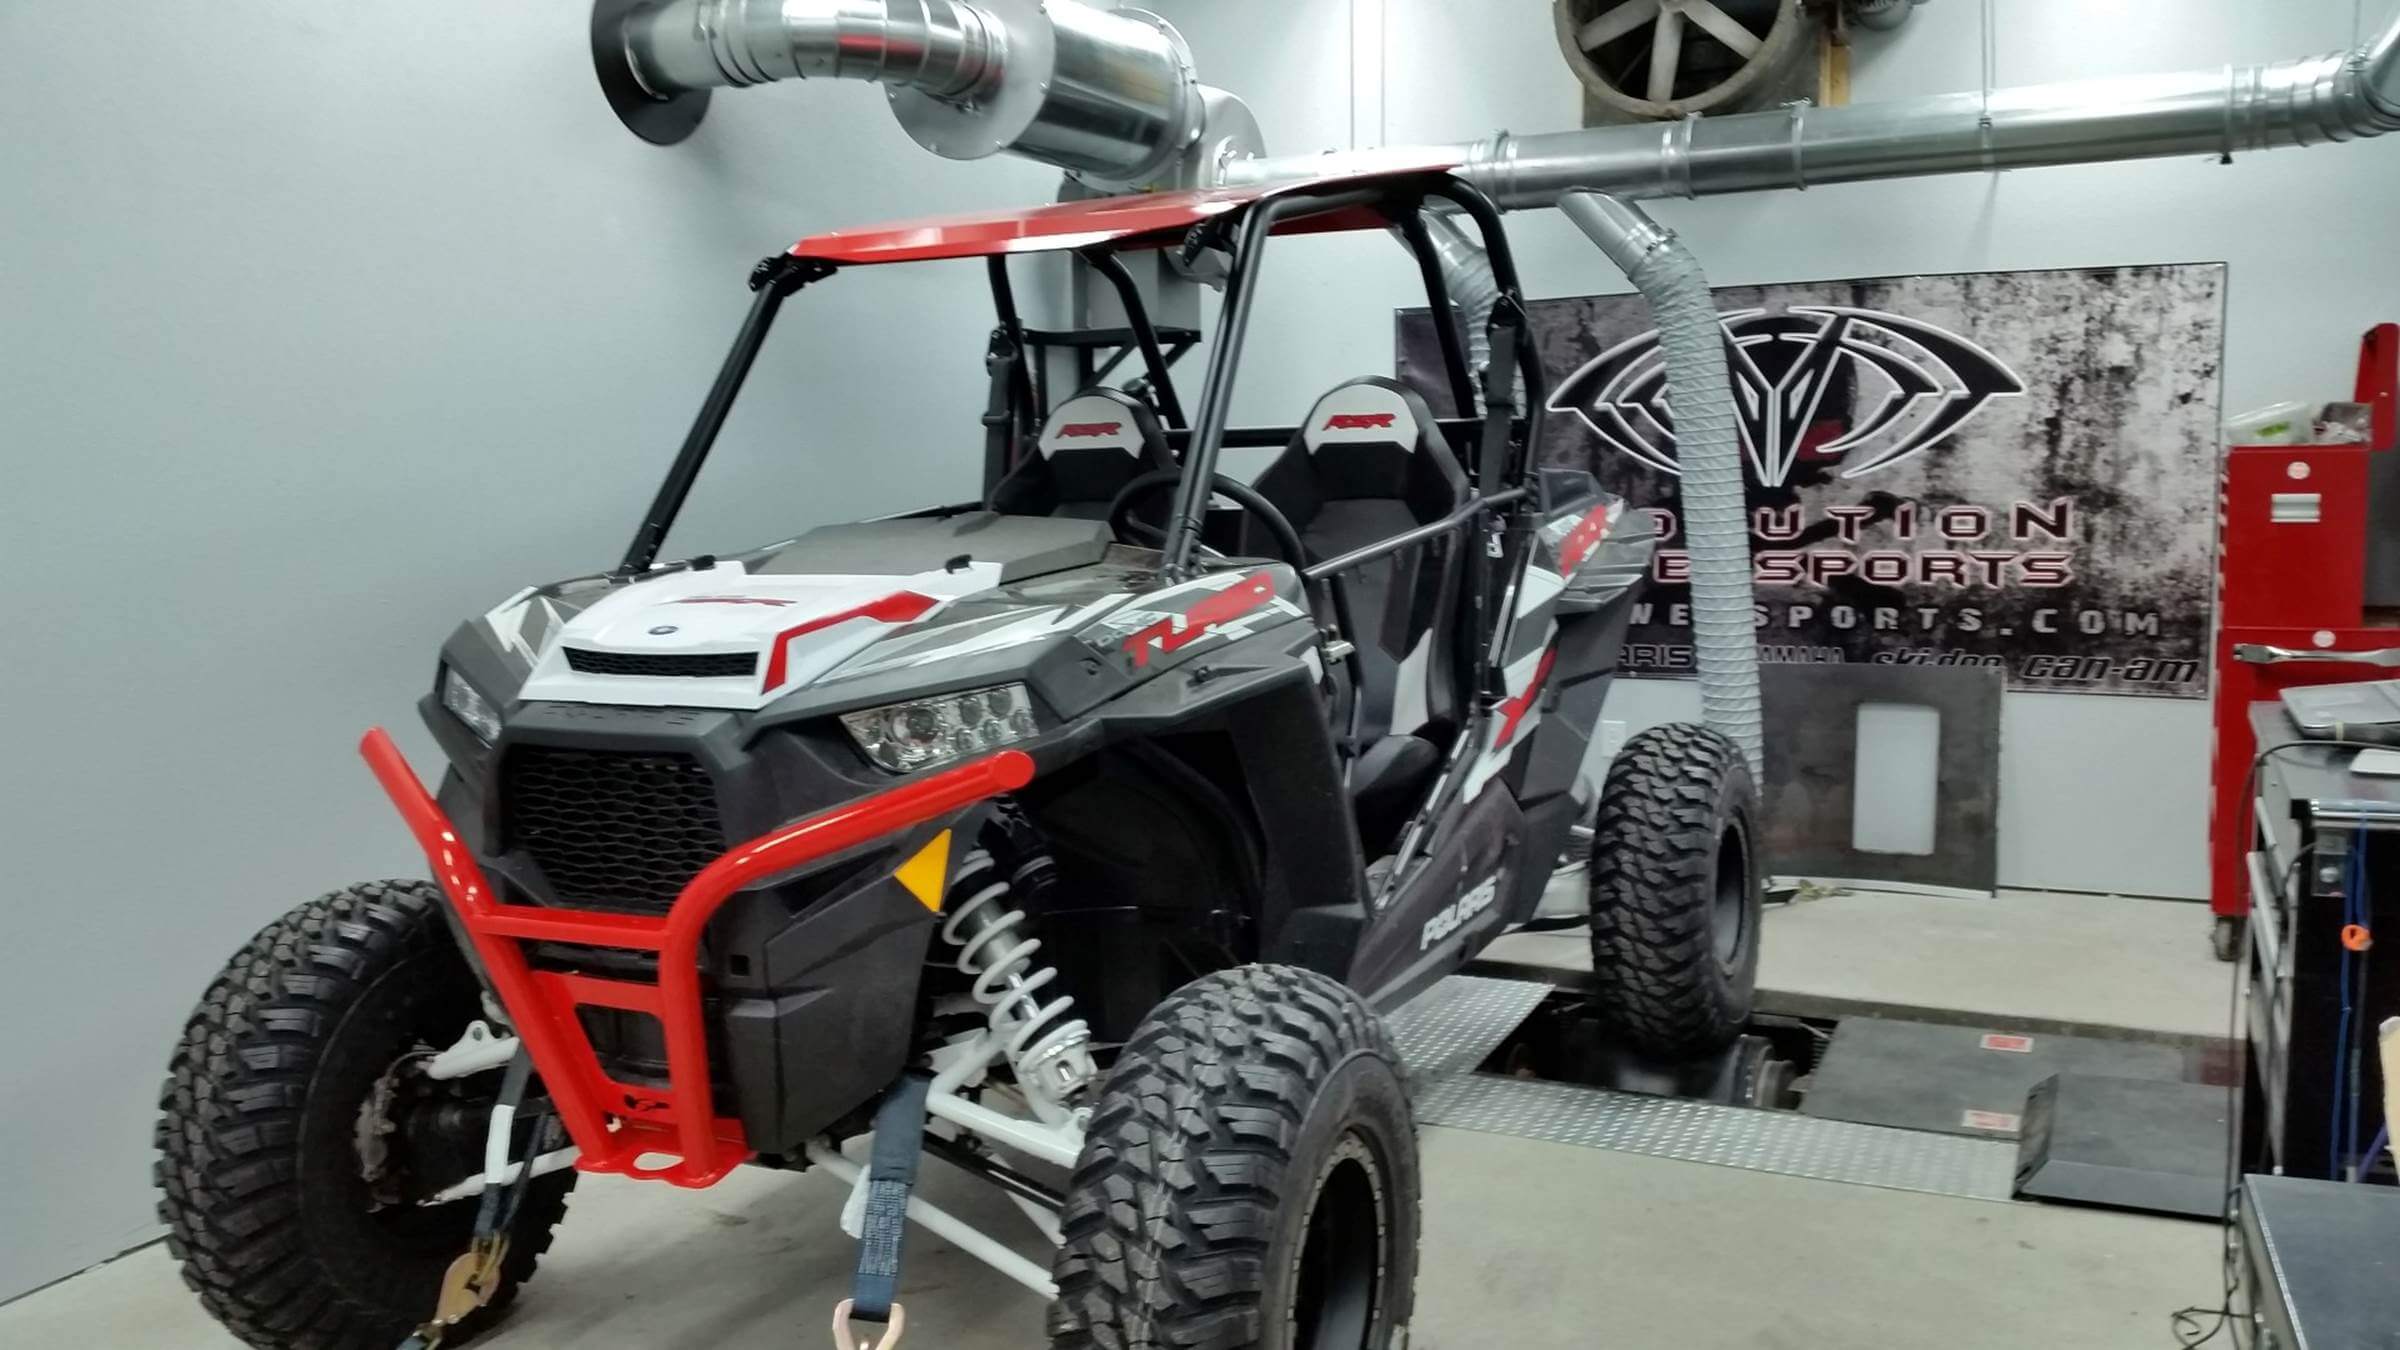 ATV attached to dyno exhaust removal system.